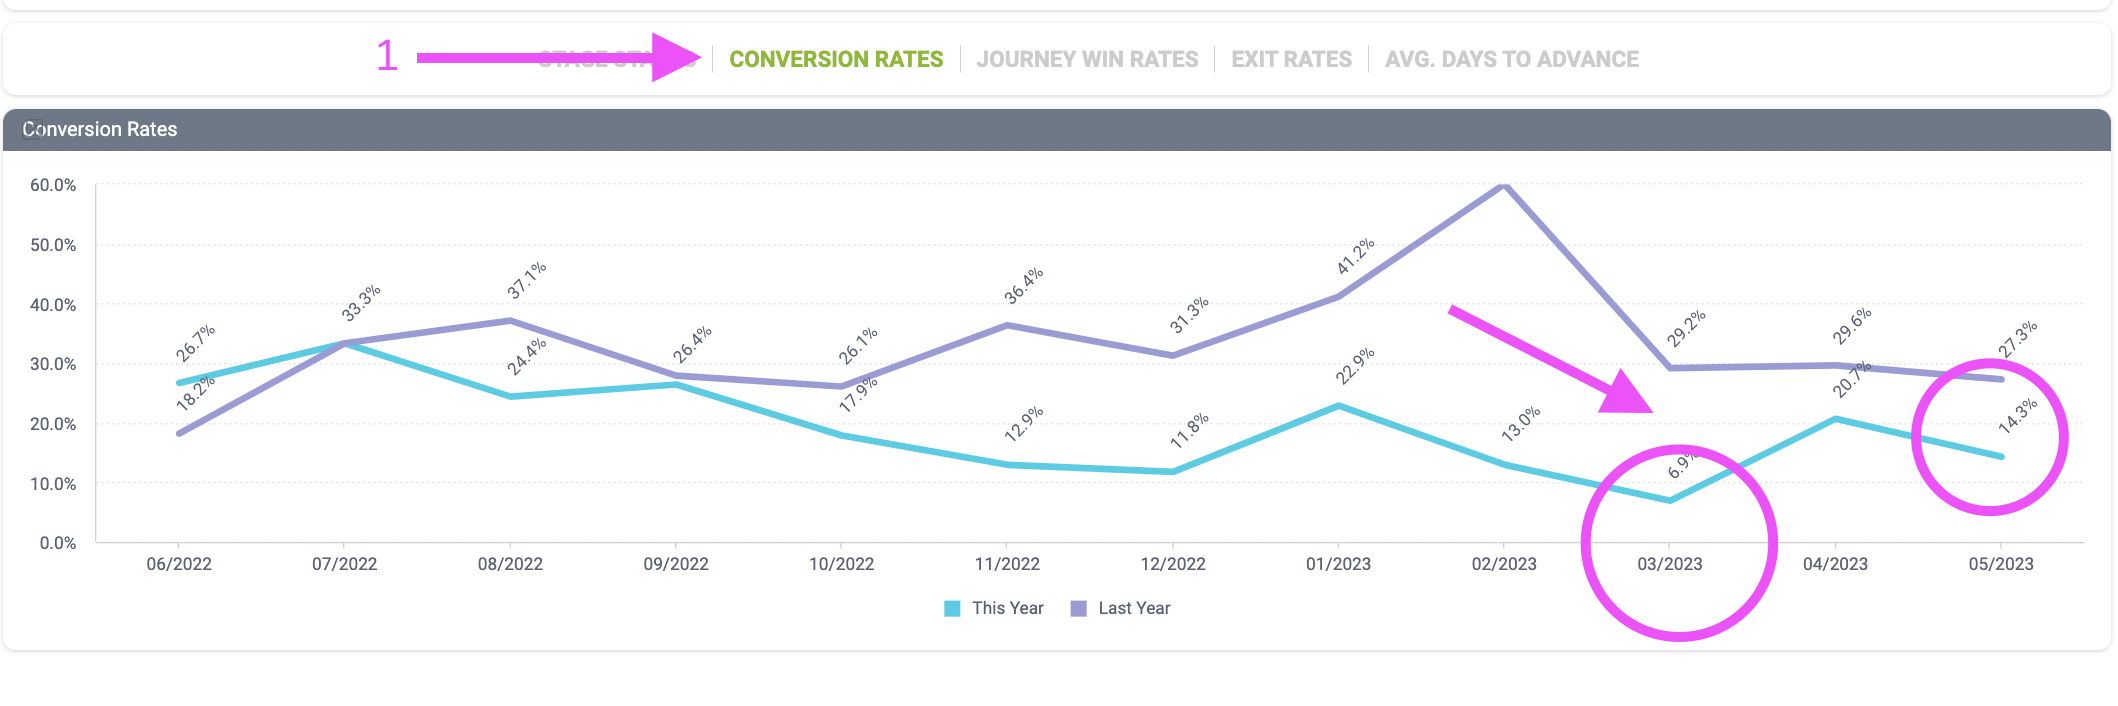 lead conversion rate to meetings